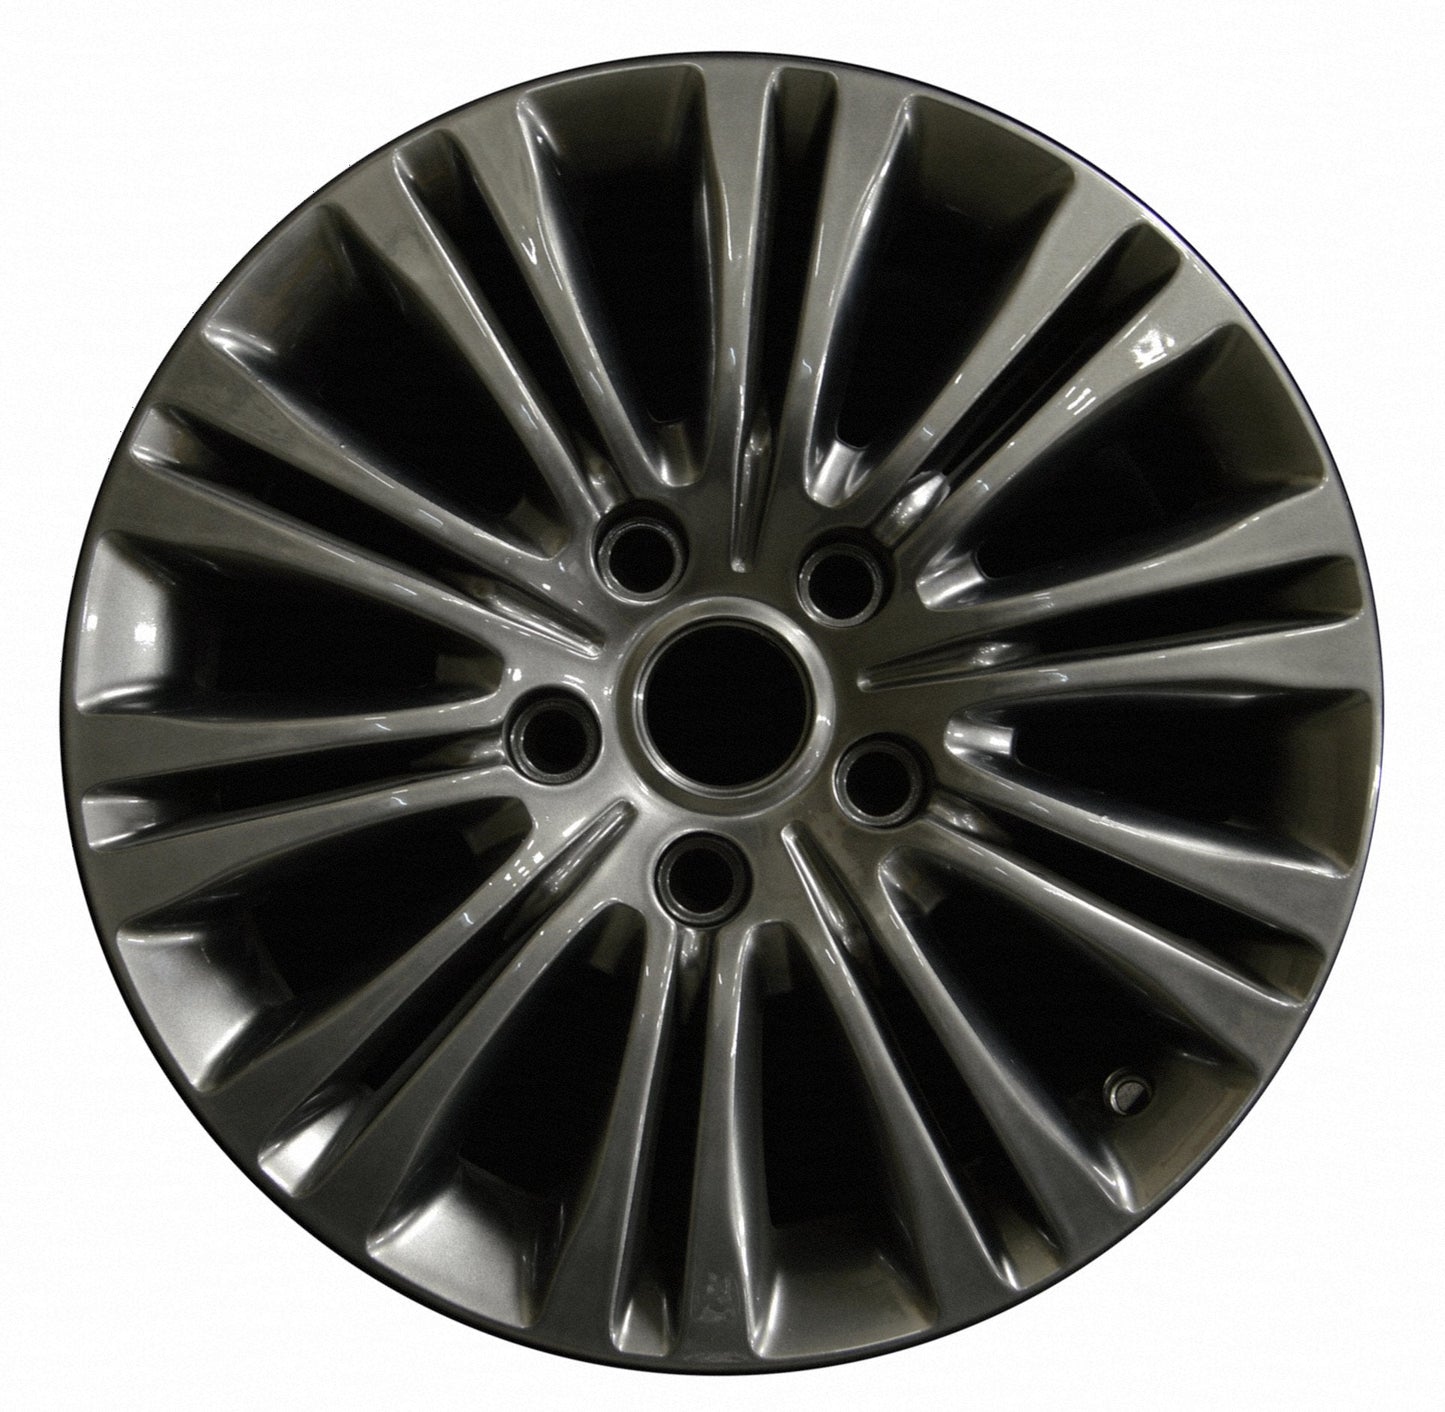 Chrysler Town & Country  2011, 2012, 2013, 2014, 2015, 2016 Factory OEM Car Wheel Size 17x6.5 Alloy WAO.2402.LS100V3.FF